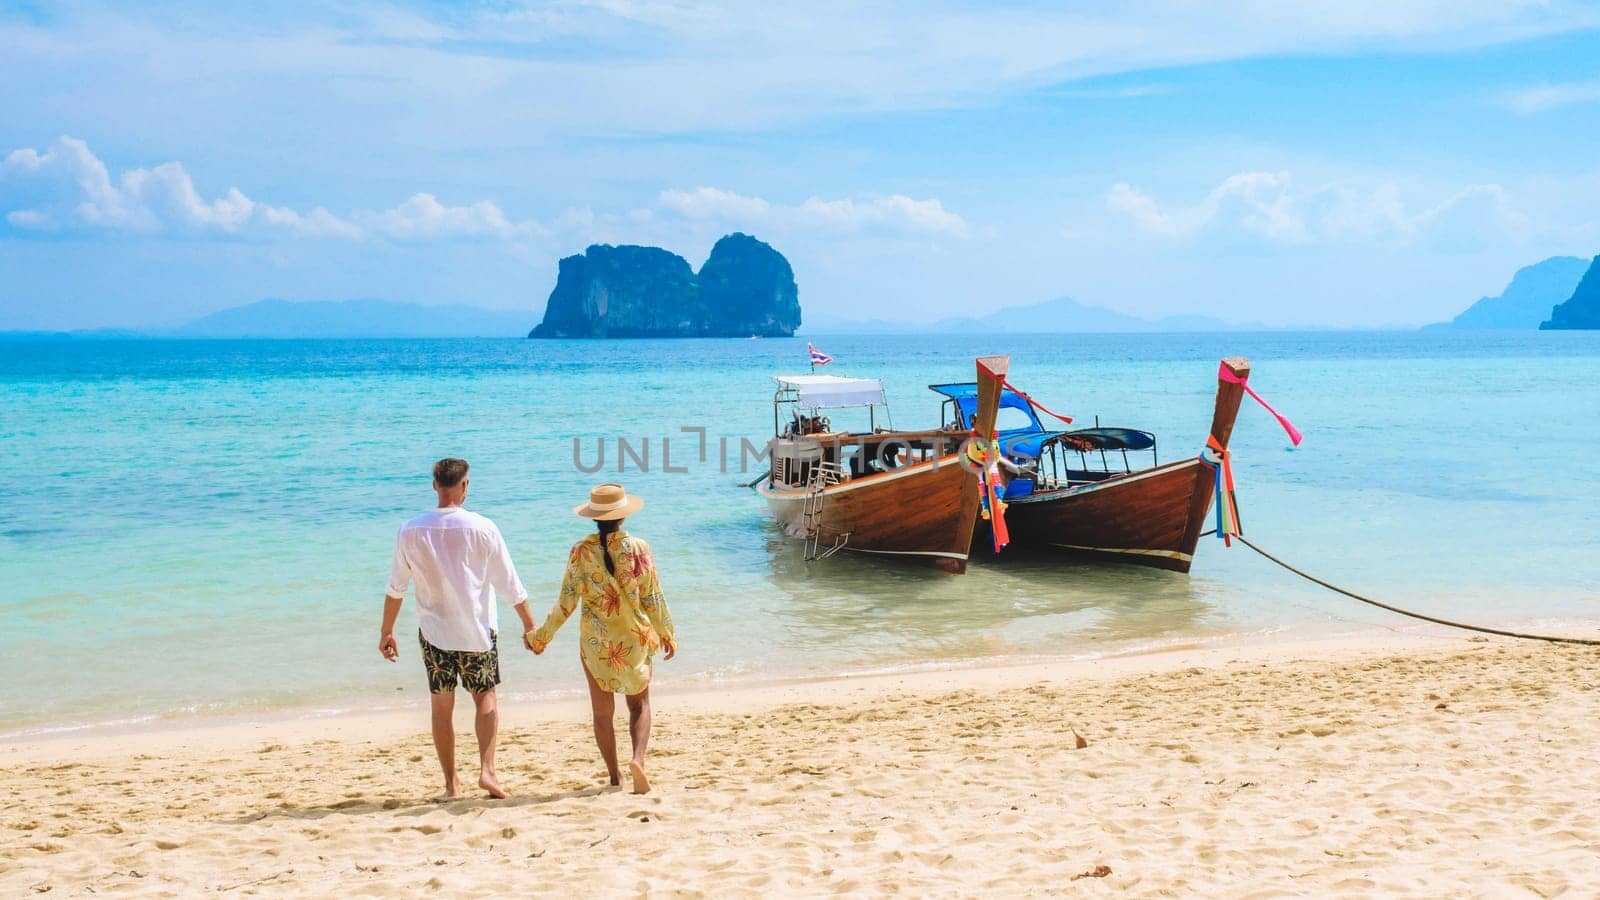 a couple of men and woman walking on the beach with longtail boats Koh Ngai island Thailand by fokkebok